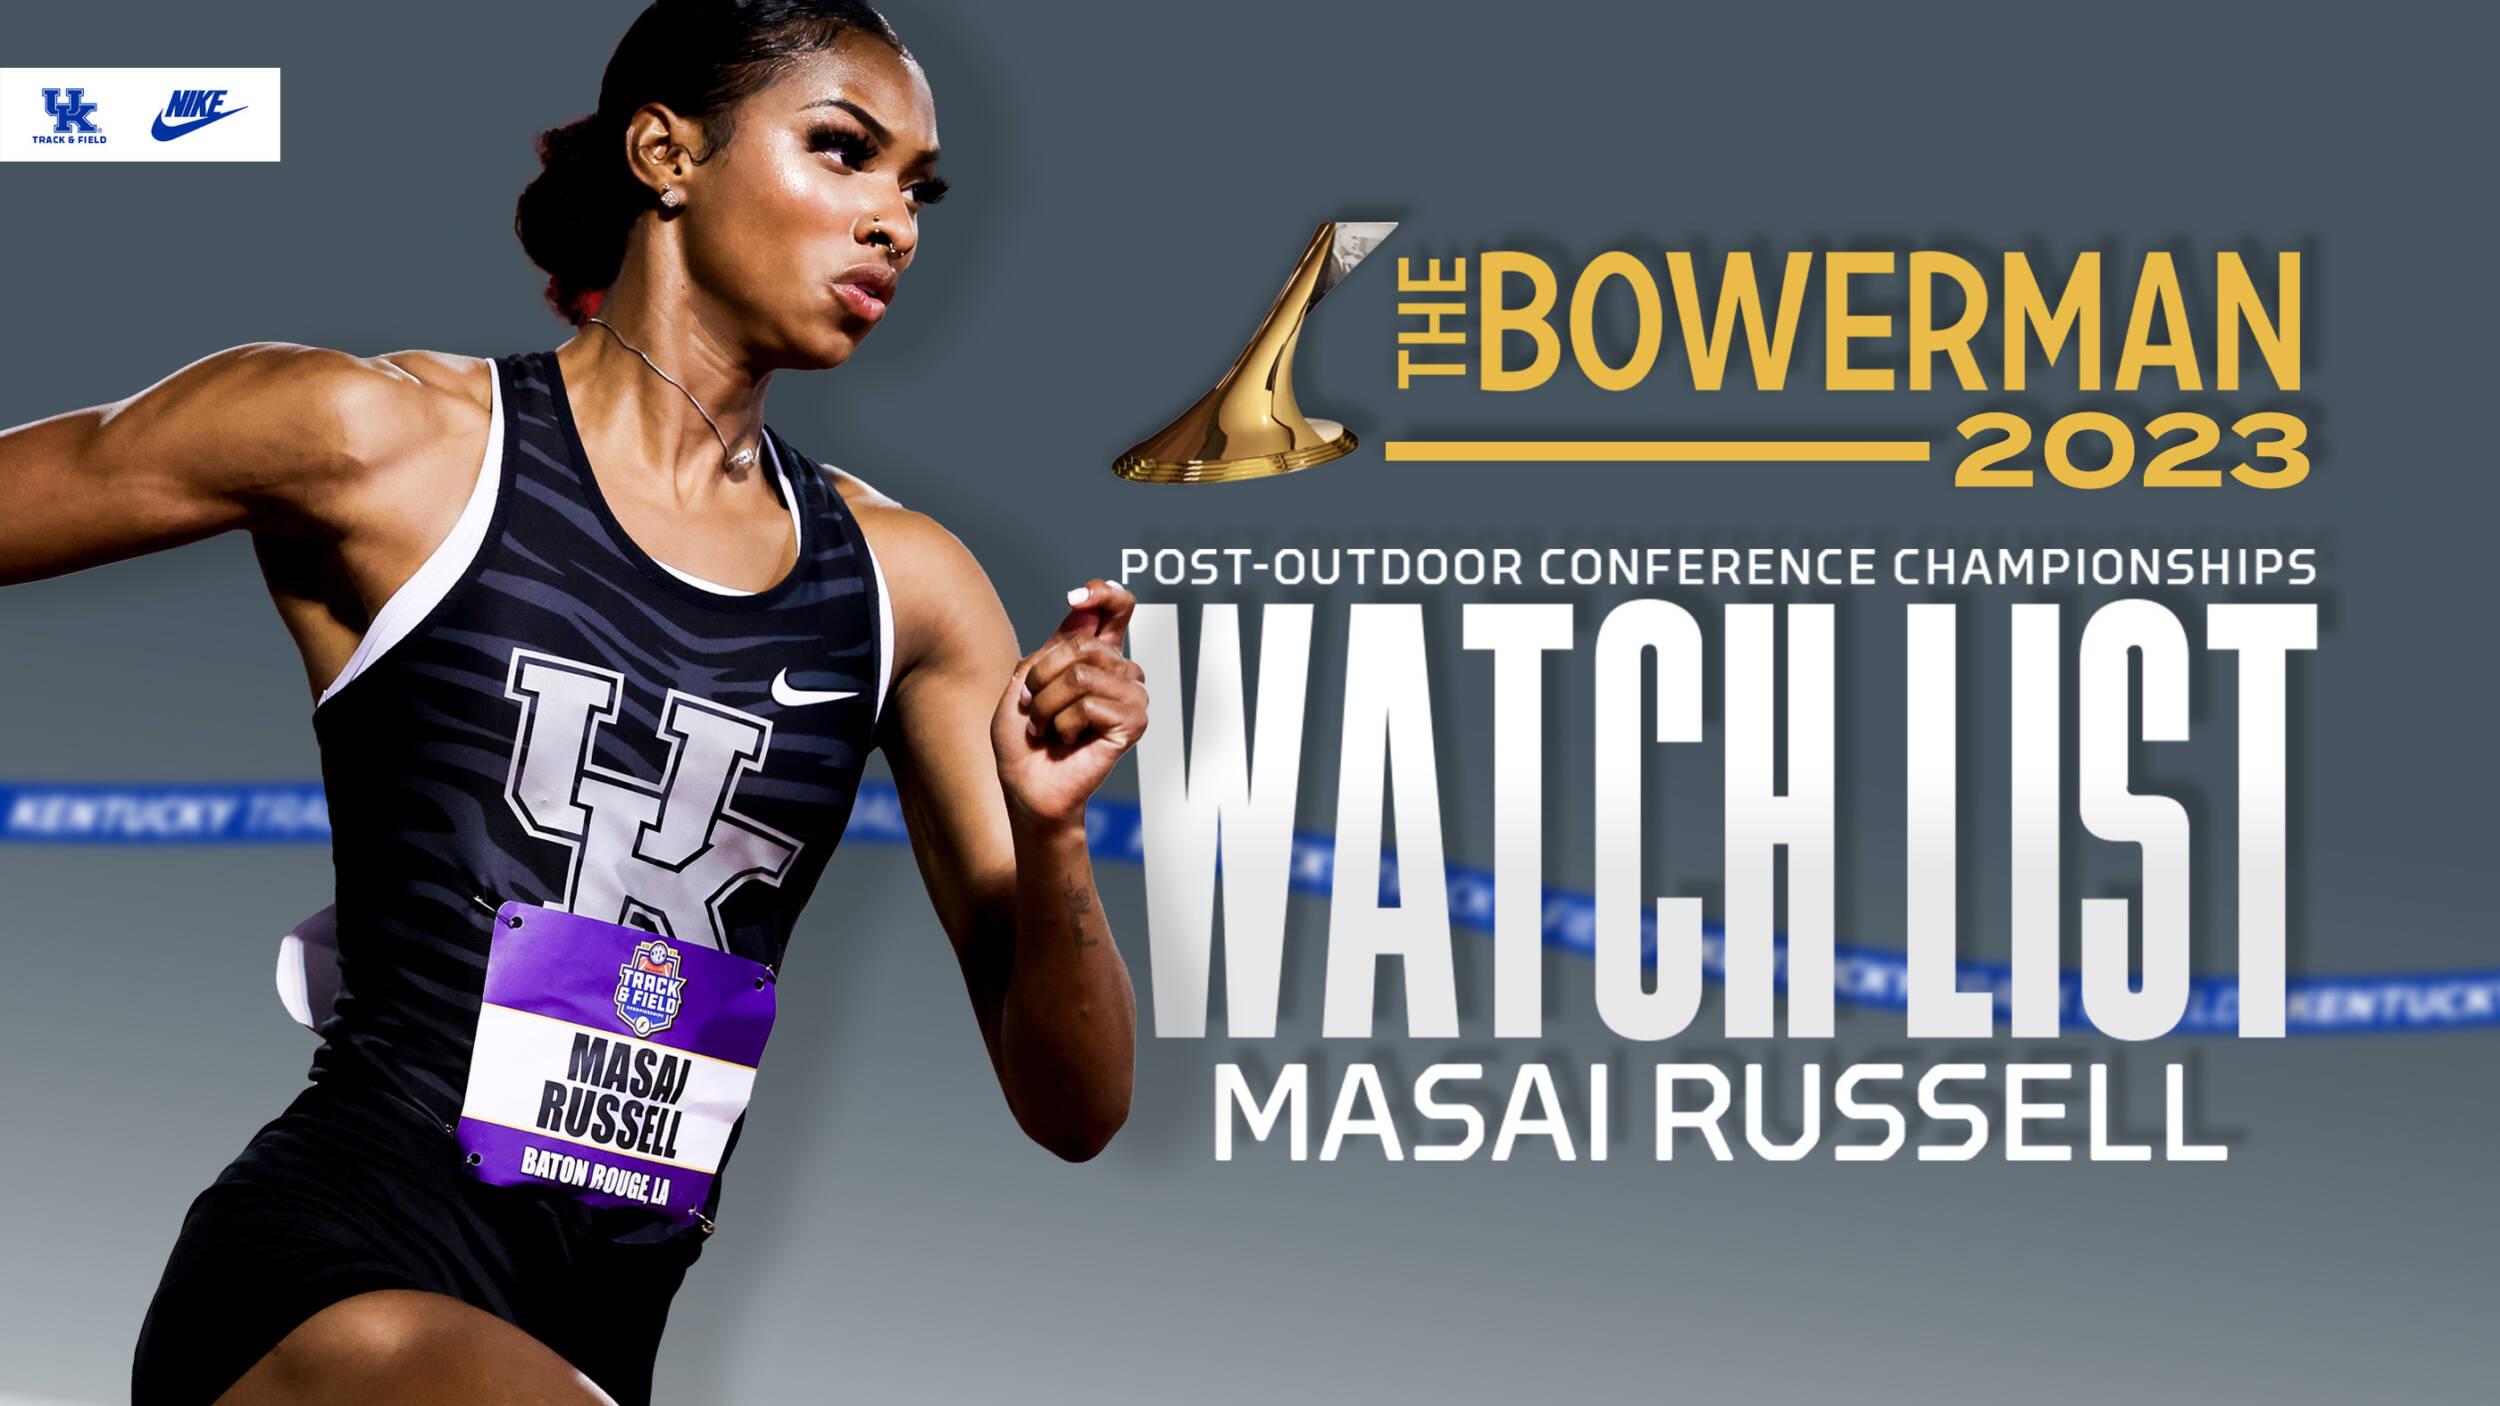 Masai Russell Remains on The Bowerman Watchlist